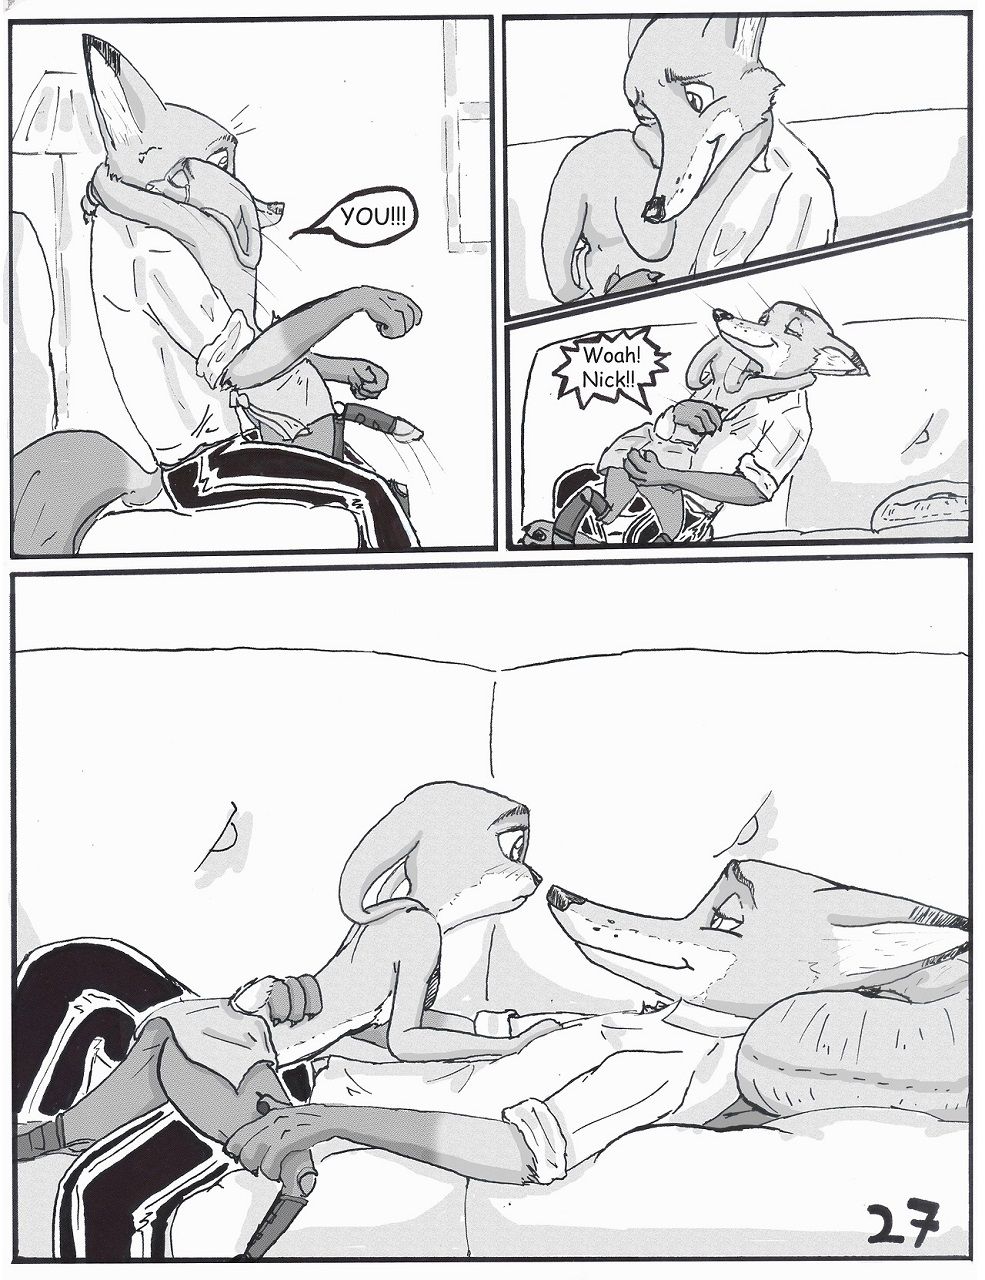 [TheGorySaint] Not Again (Zootopia) Ongoing 27